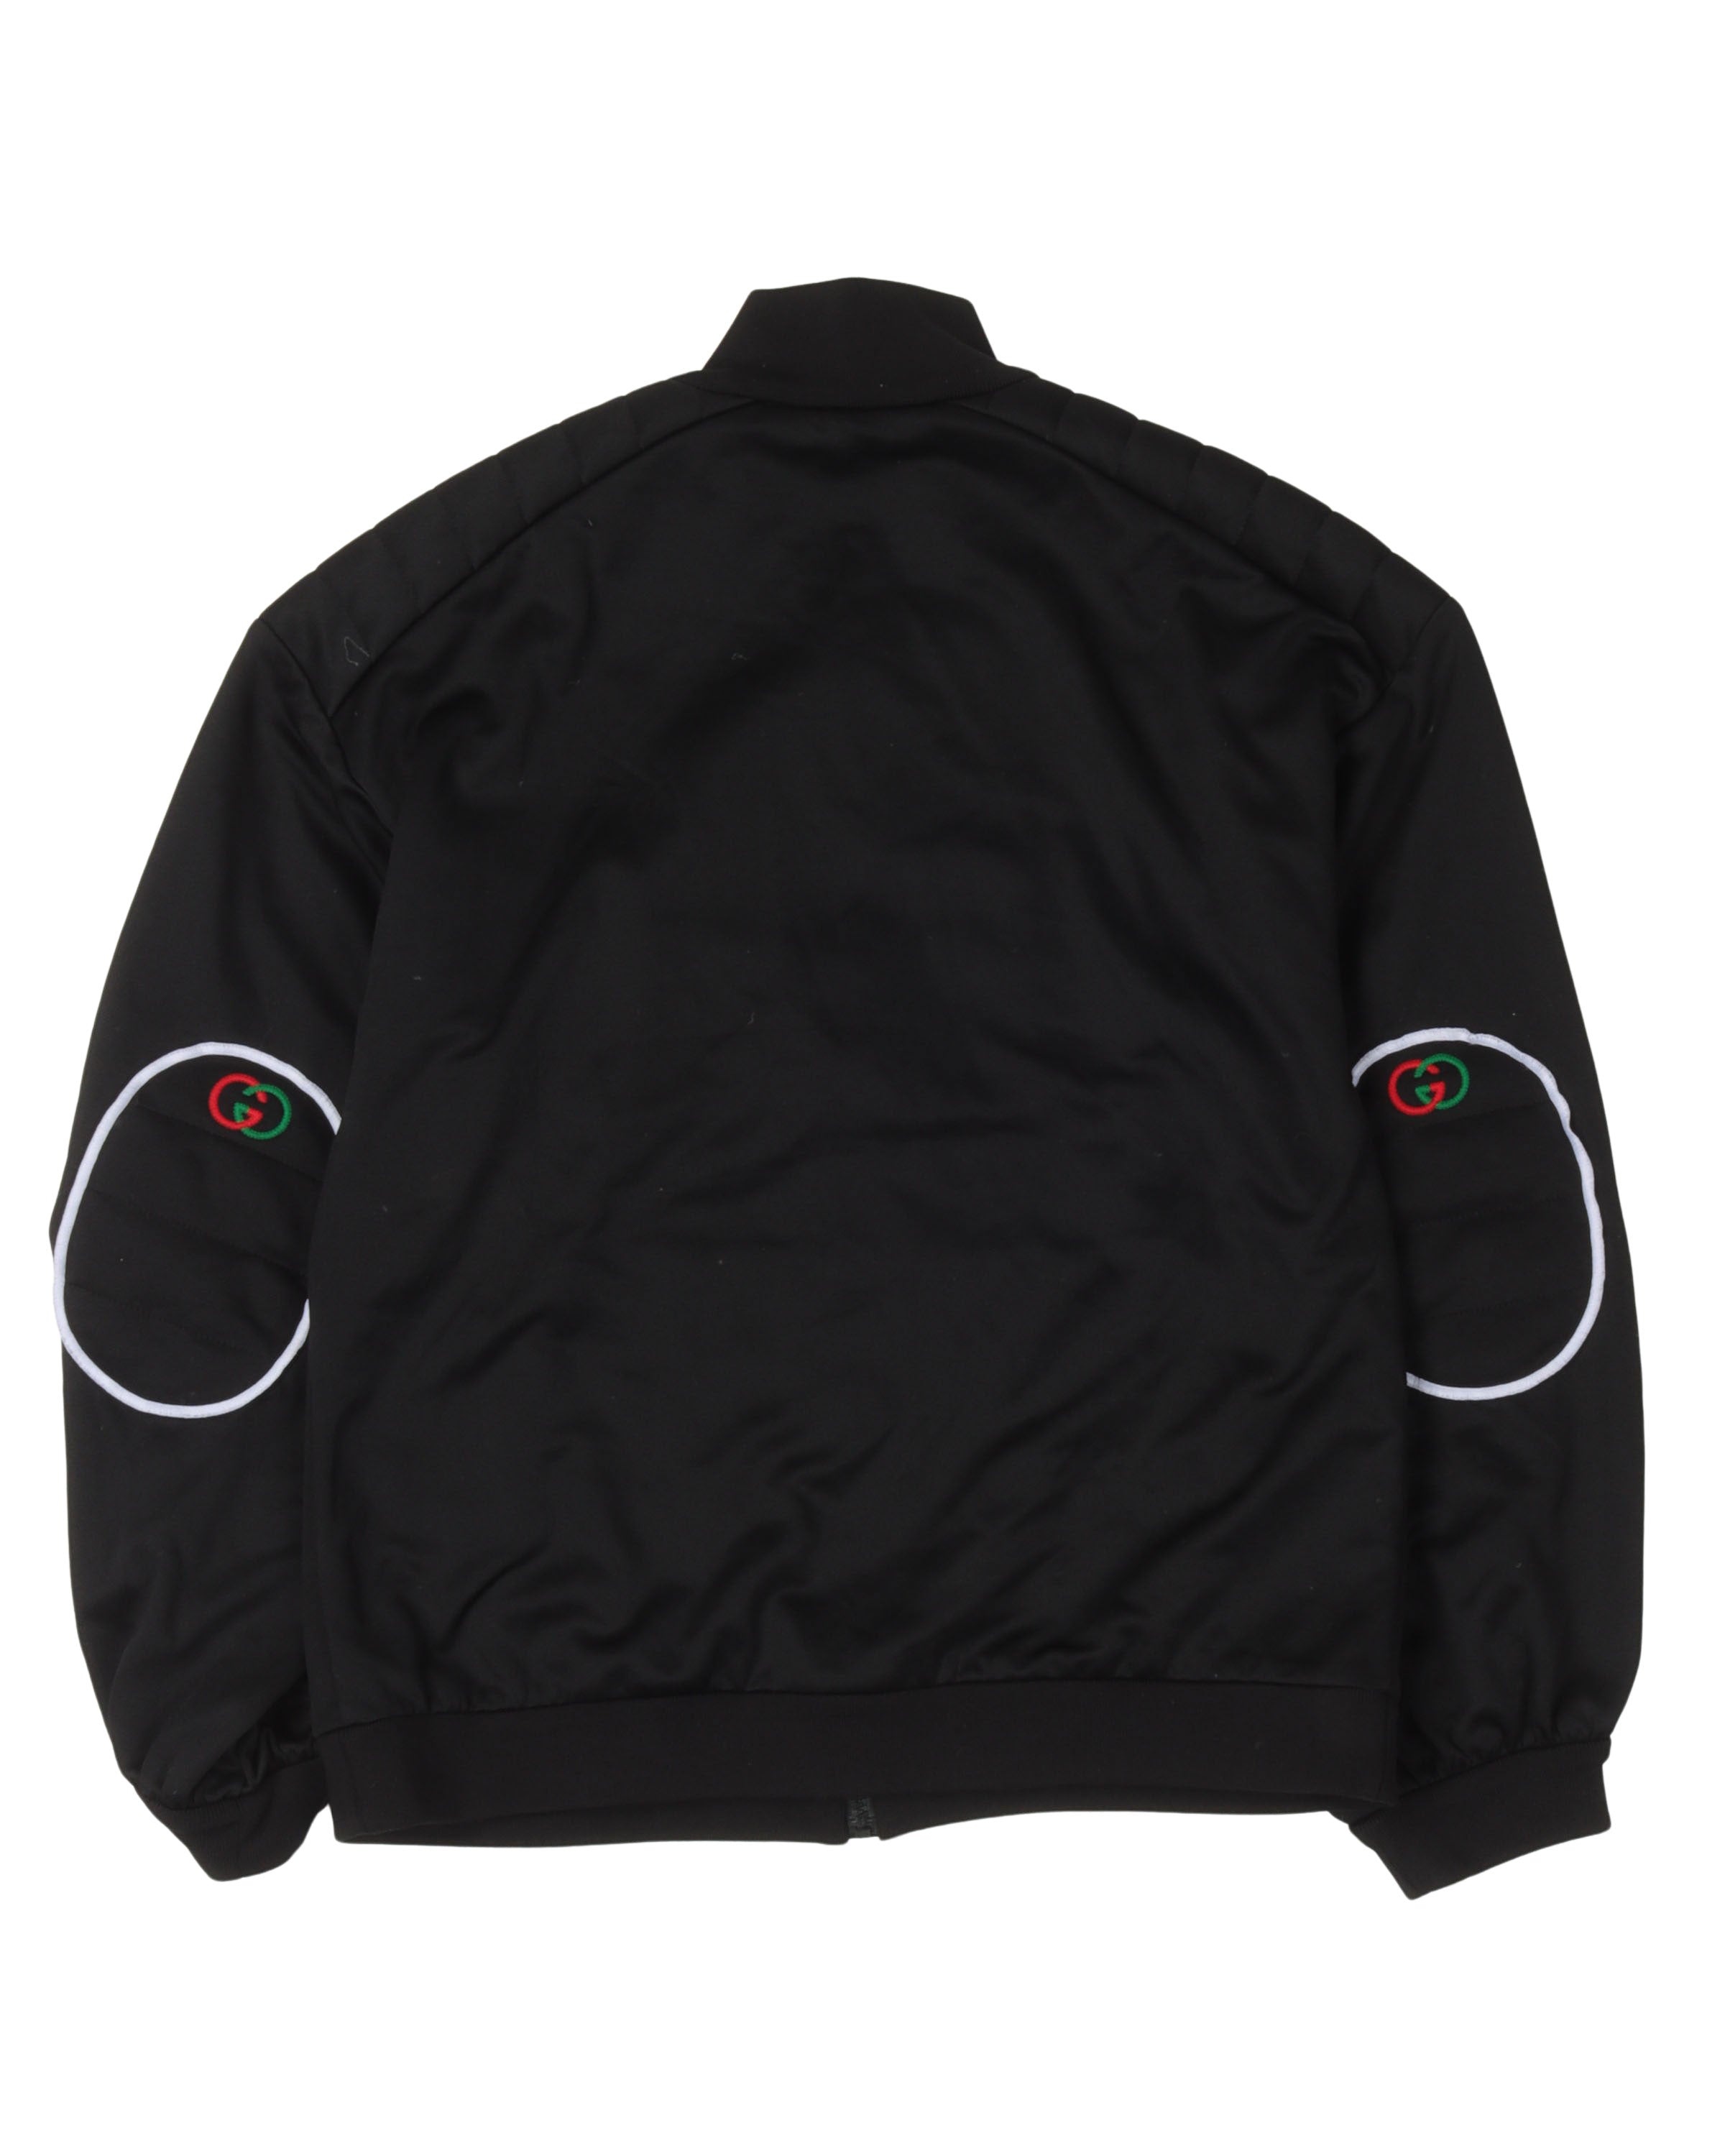 Elbow Pad Embroidered Logo Jacket